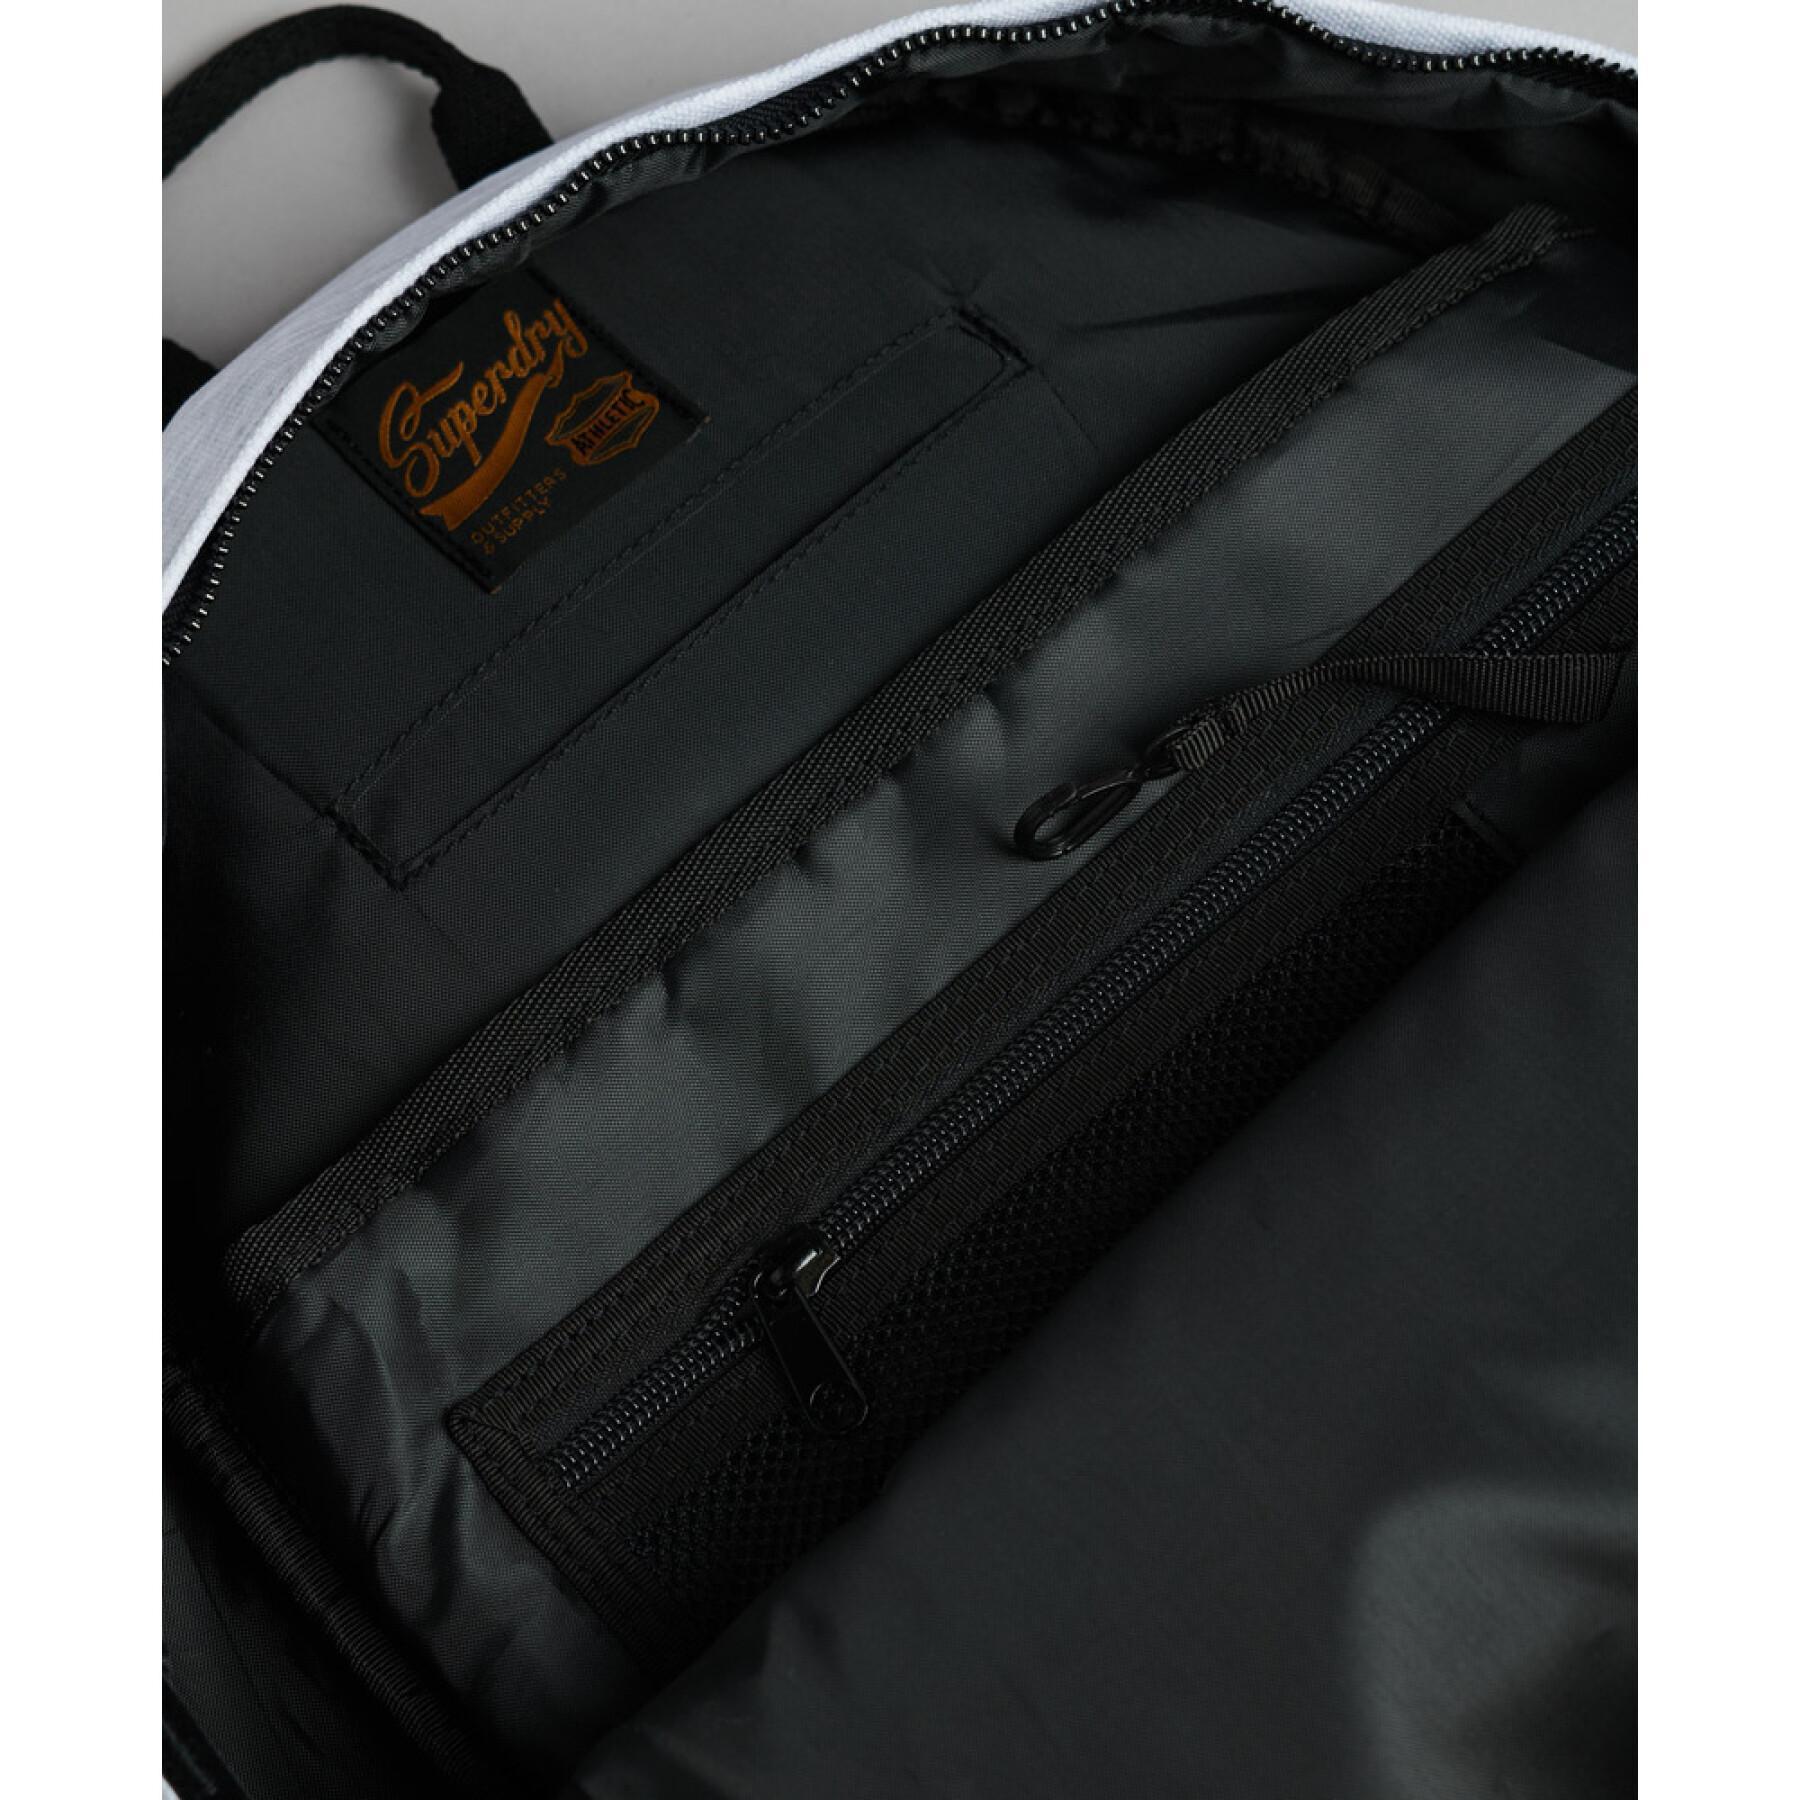 Backpack Superdry Graphic Montana